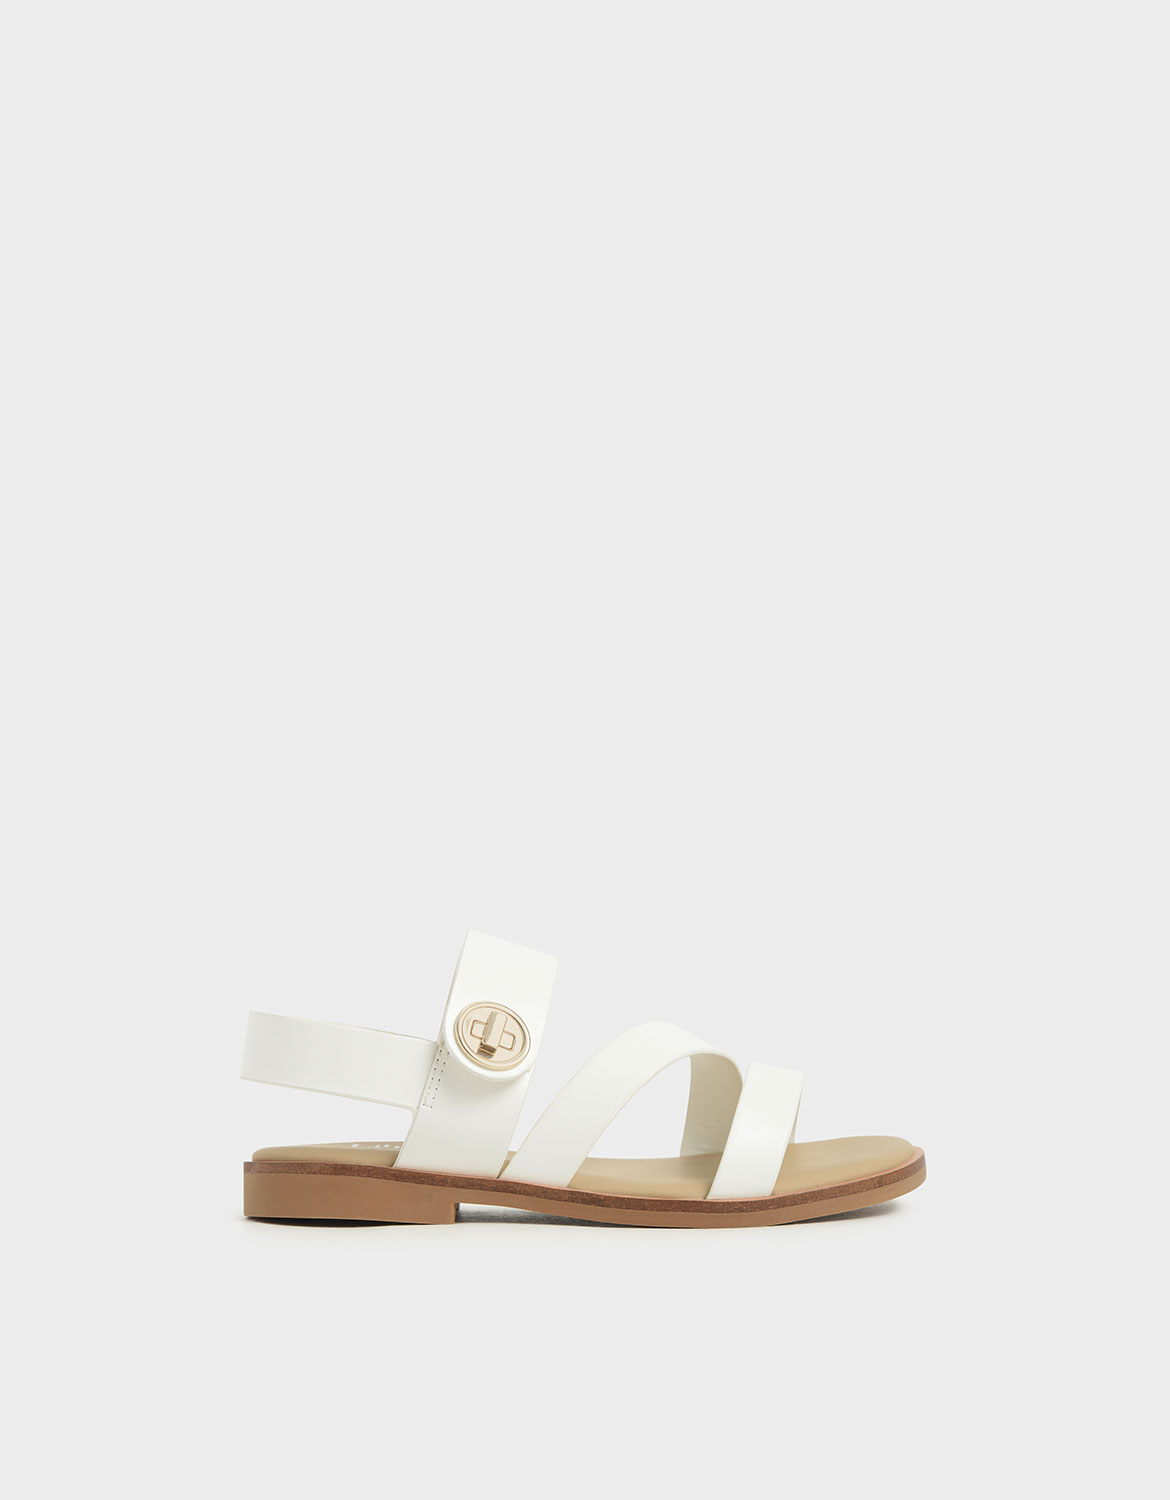 Charles & Keith Metallic Asymmetric Strappy Heeled Sandals in White